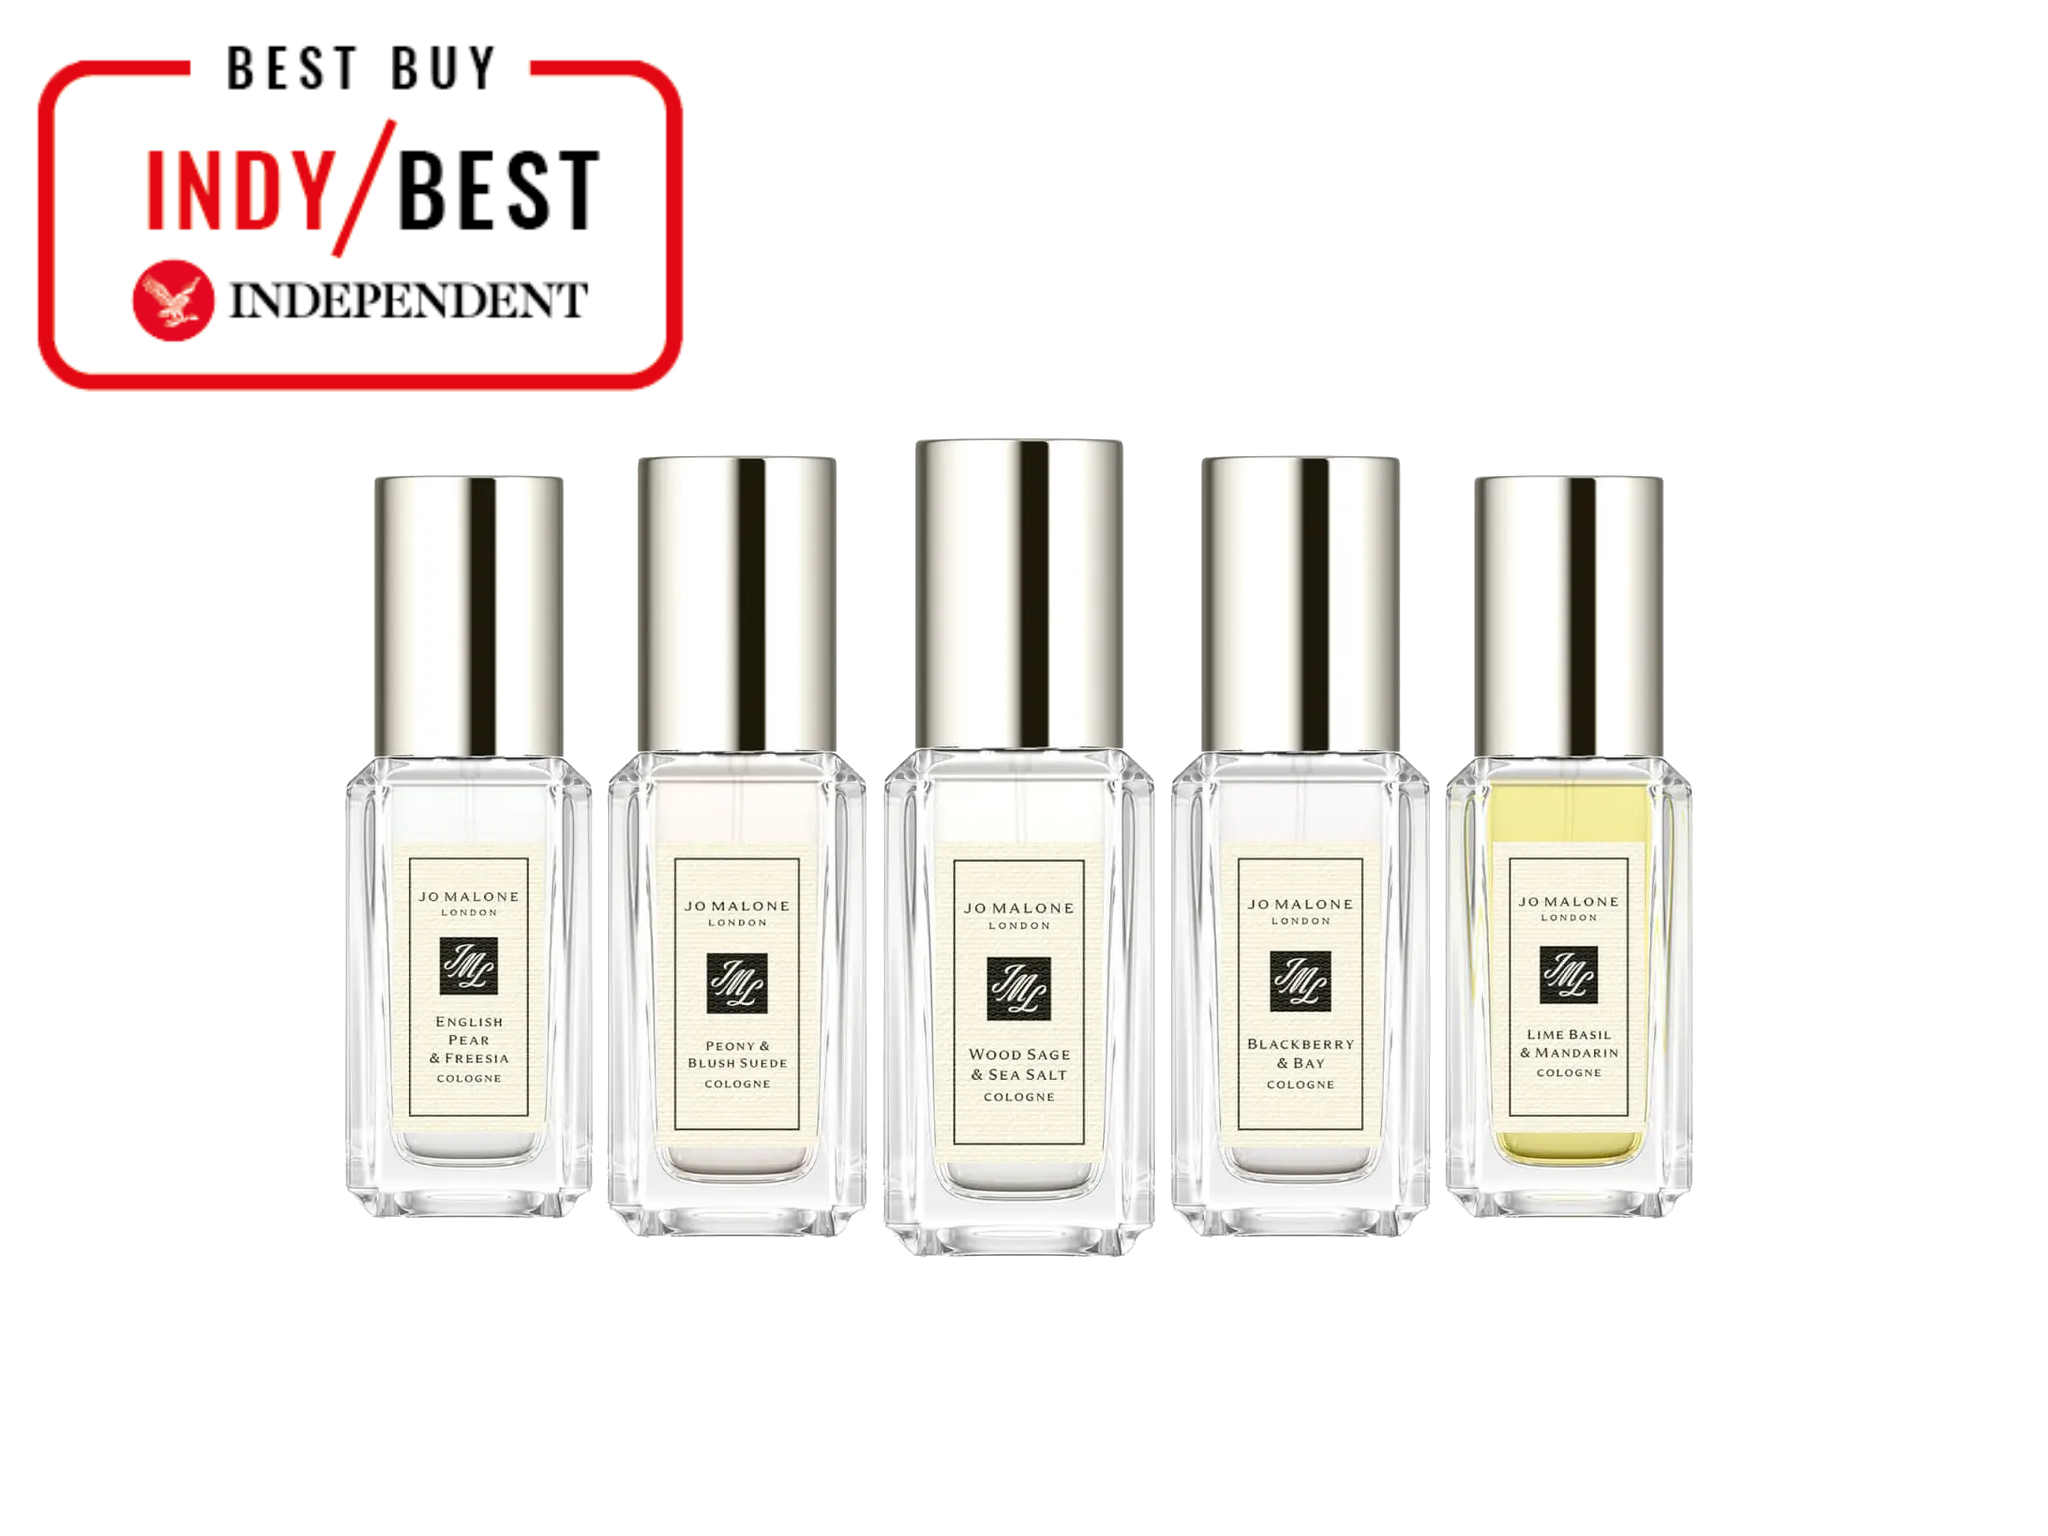 Jo Malone Christmas gifts indybest